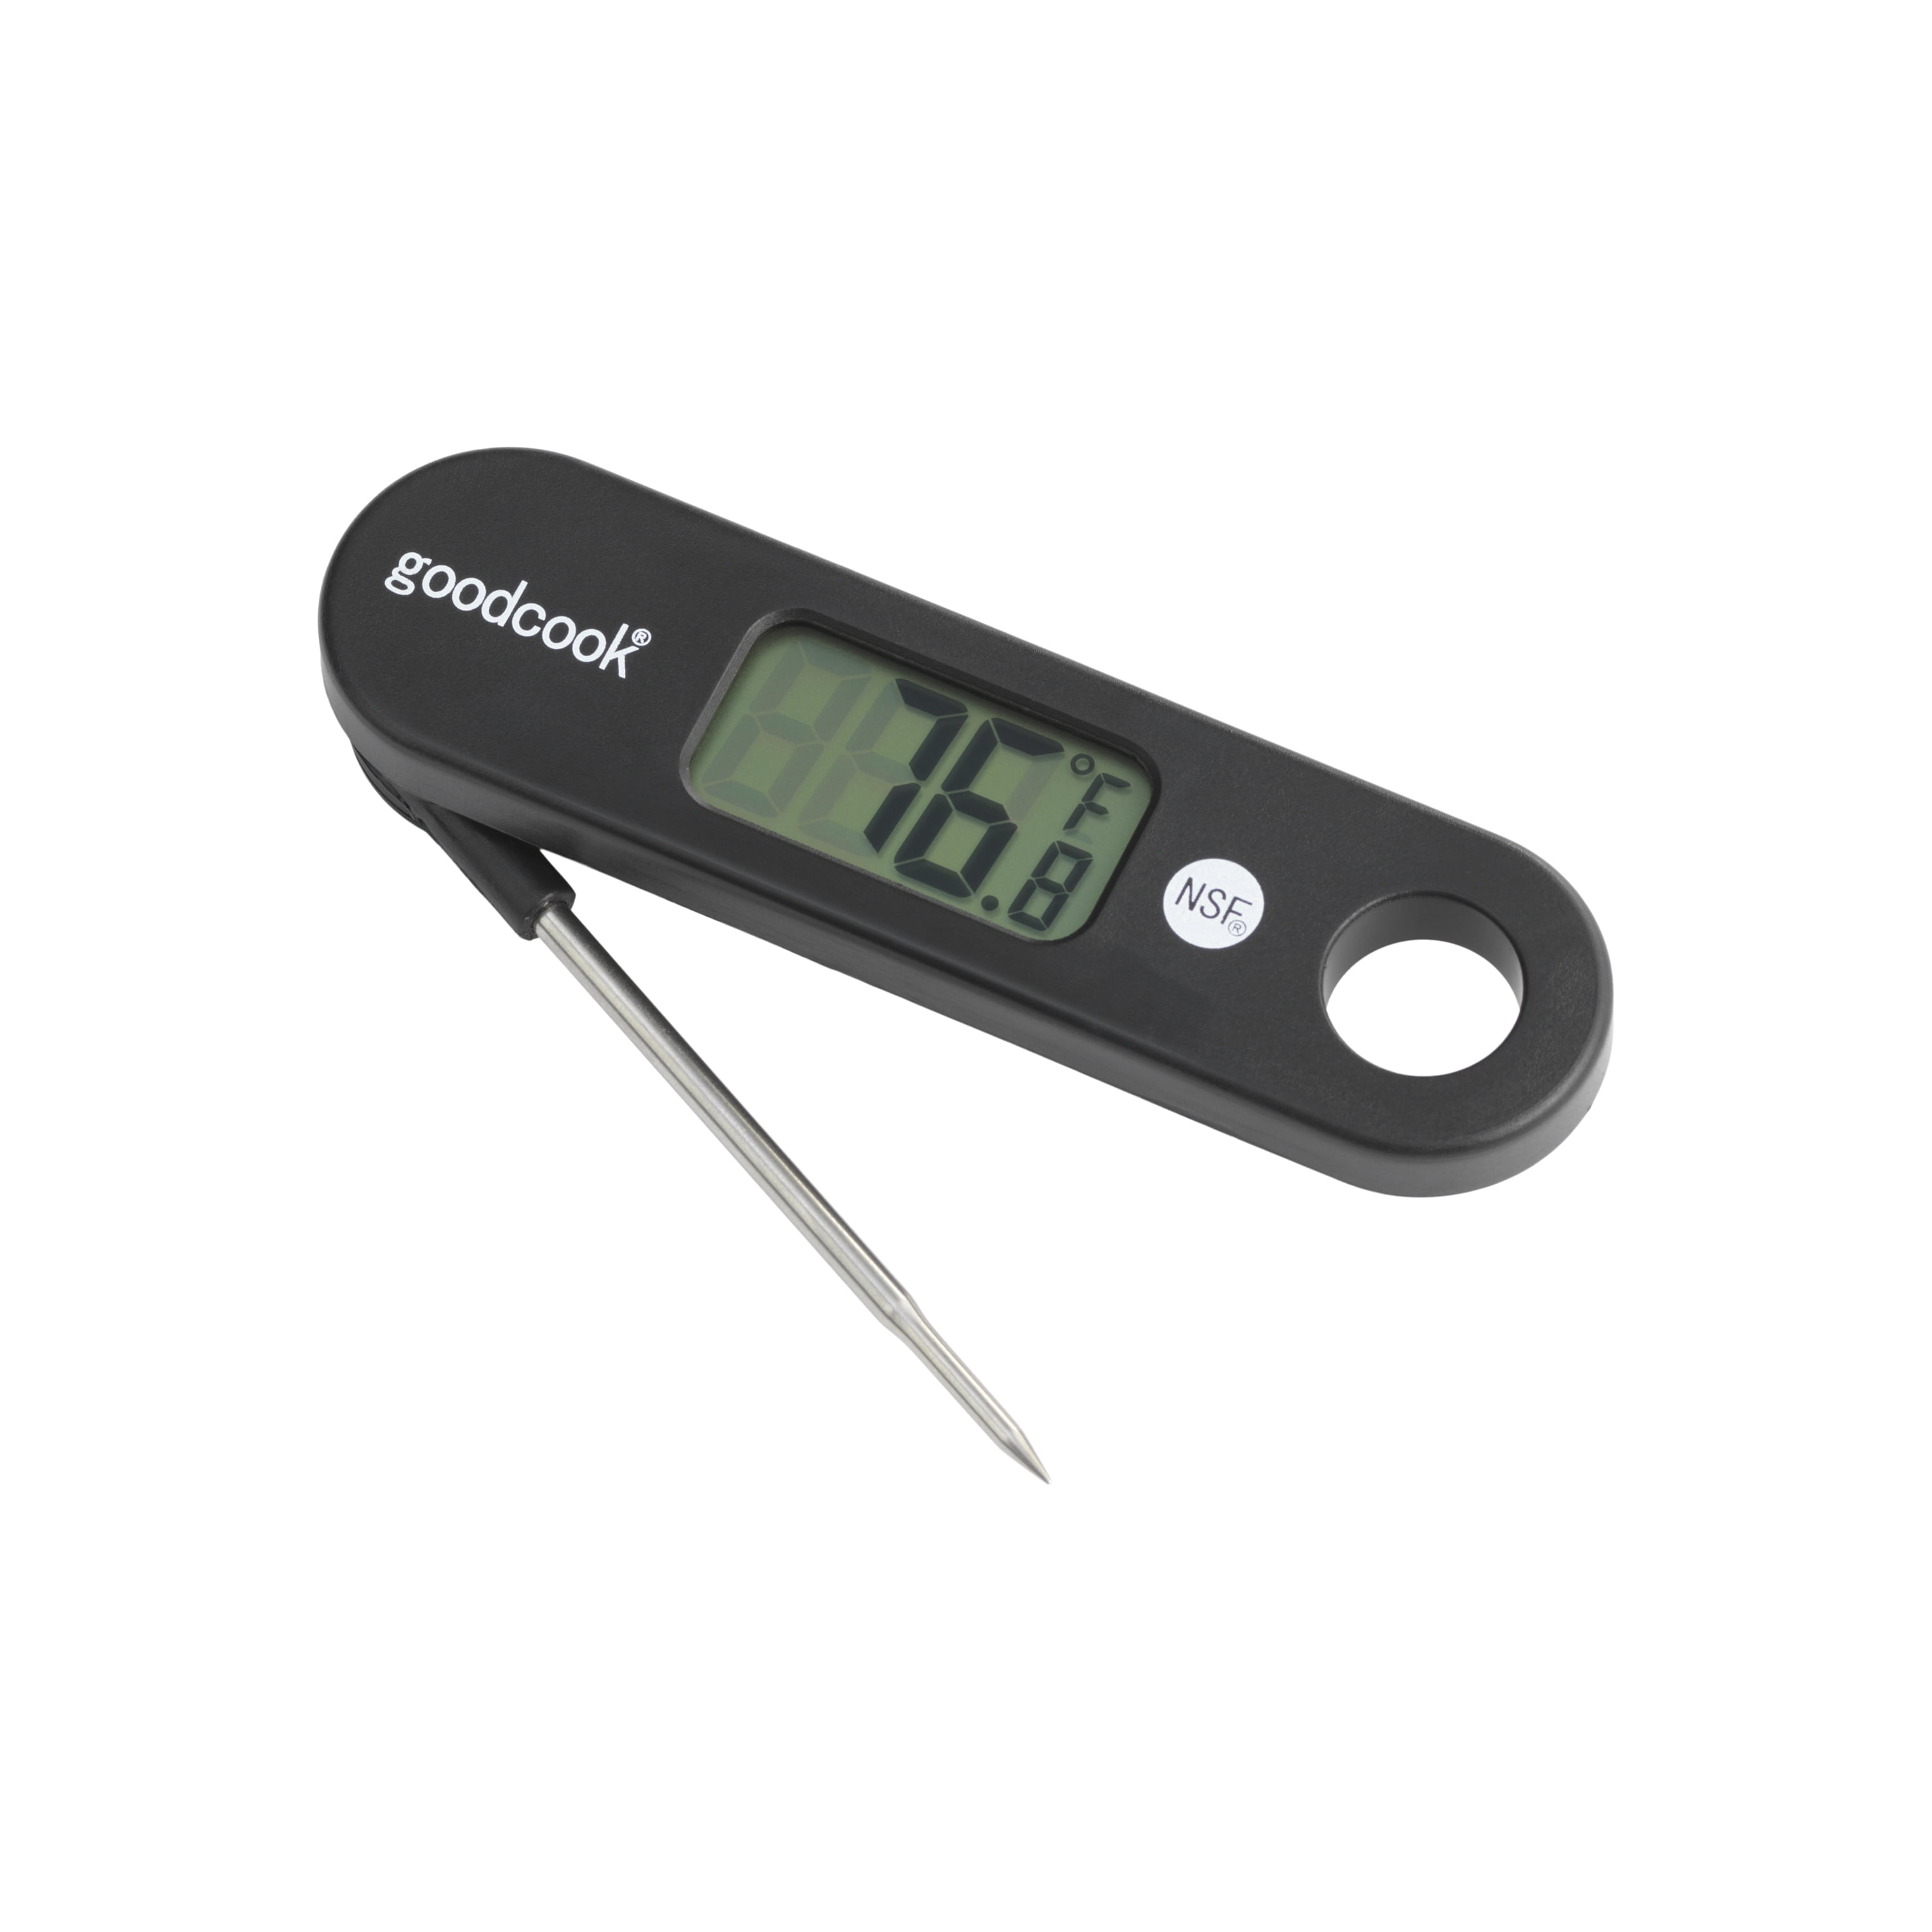 These reliable, cheap meat thermometers are kitchen essentials